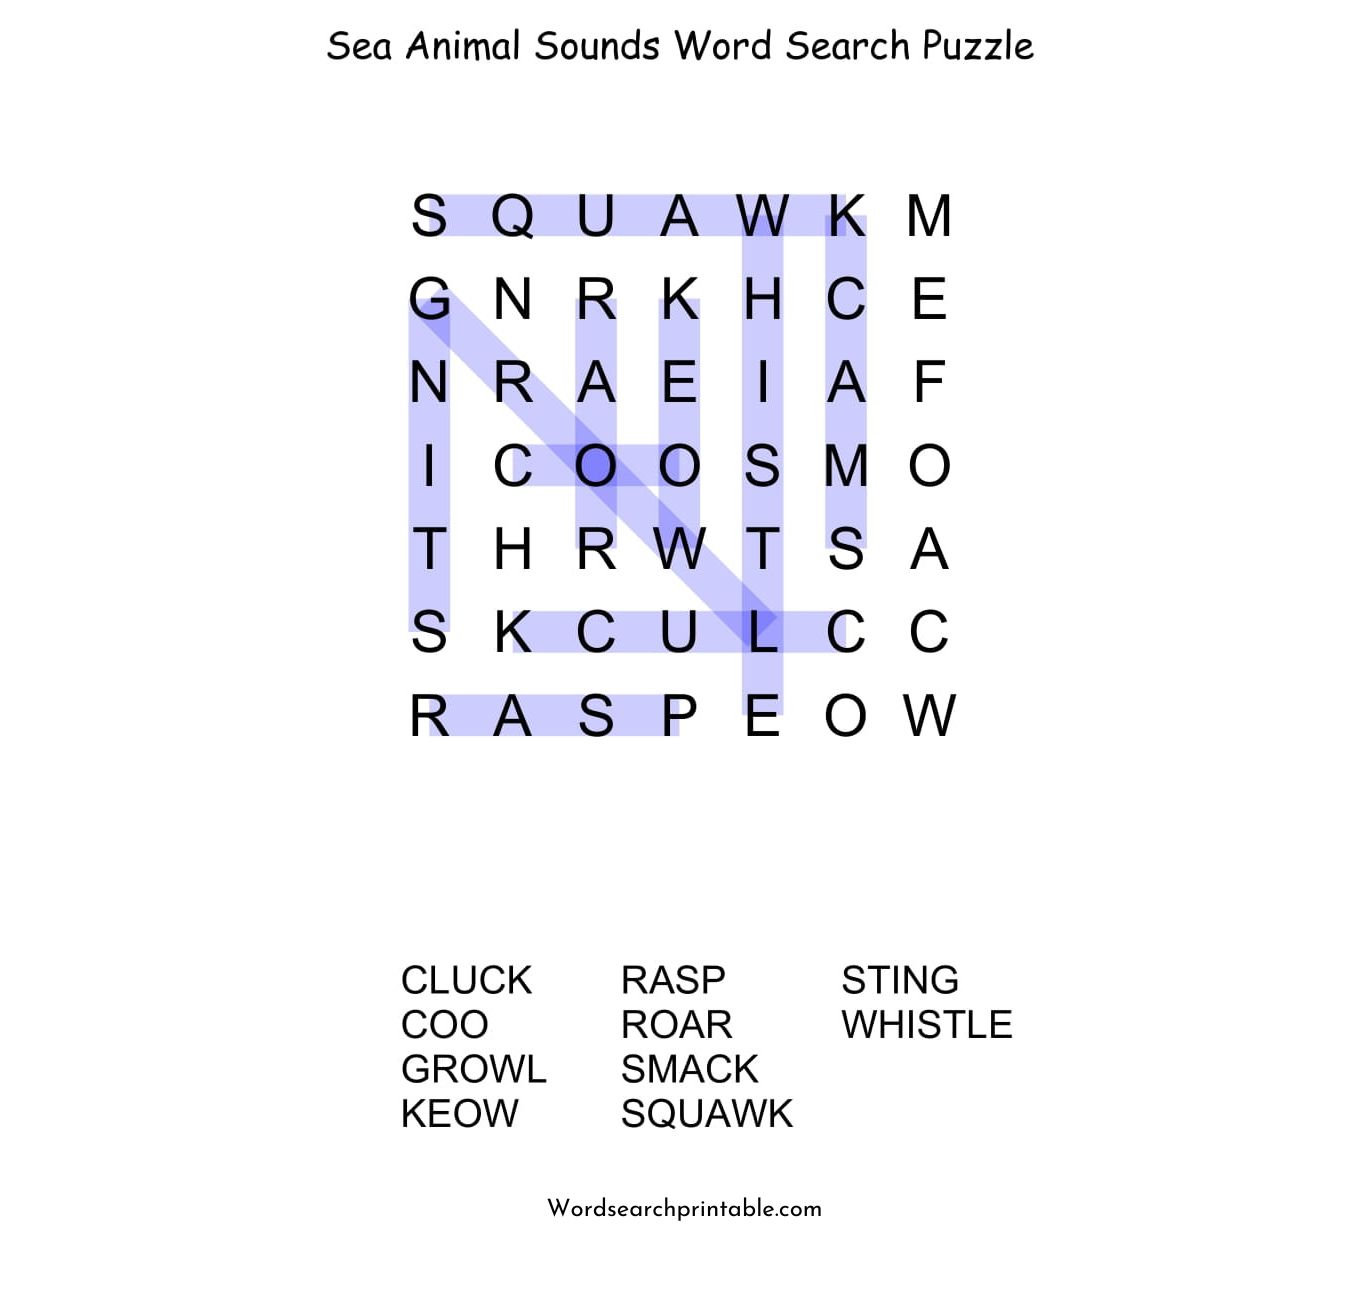 sea animal sounds word search puzzle solution